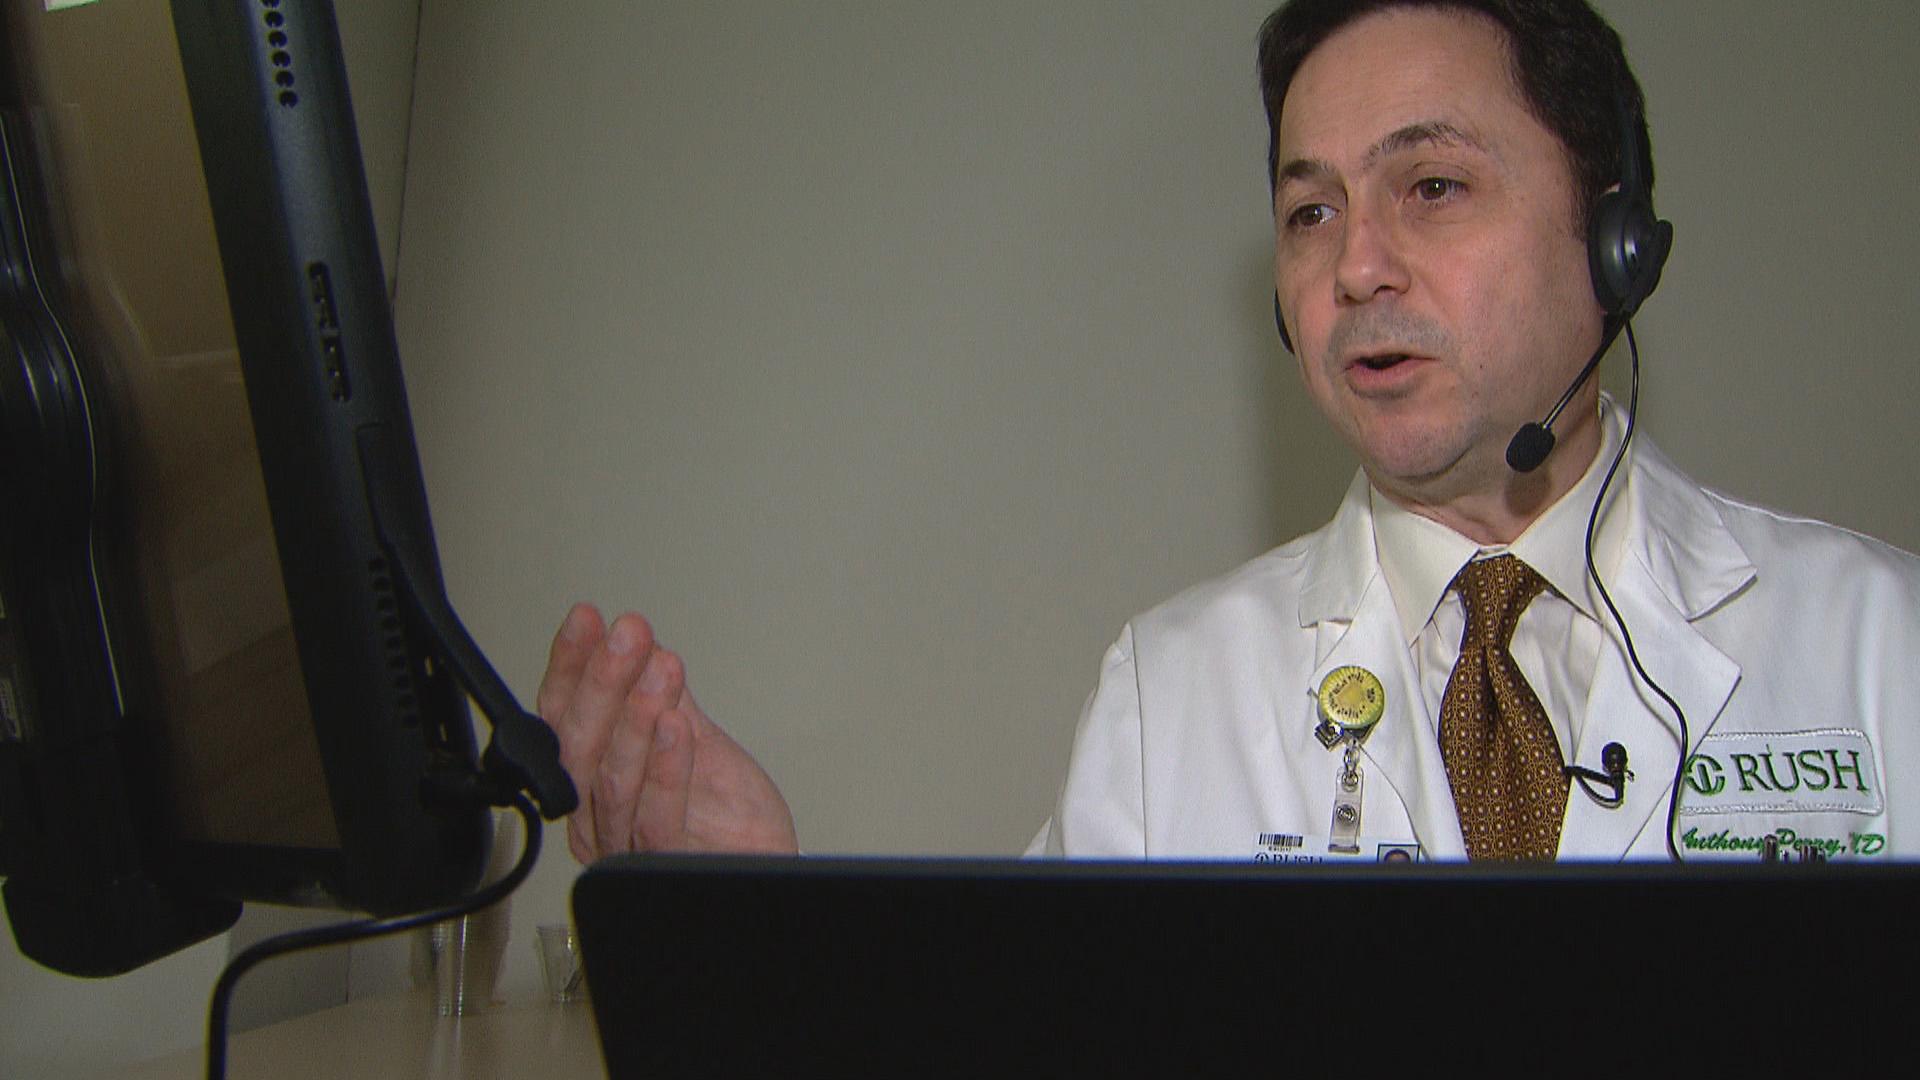 Rush University Hospital physician Anthony Perry. (WTTW News)